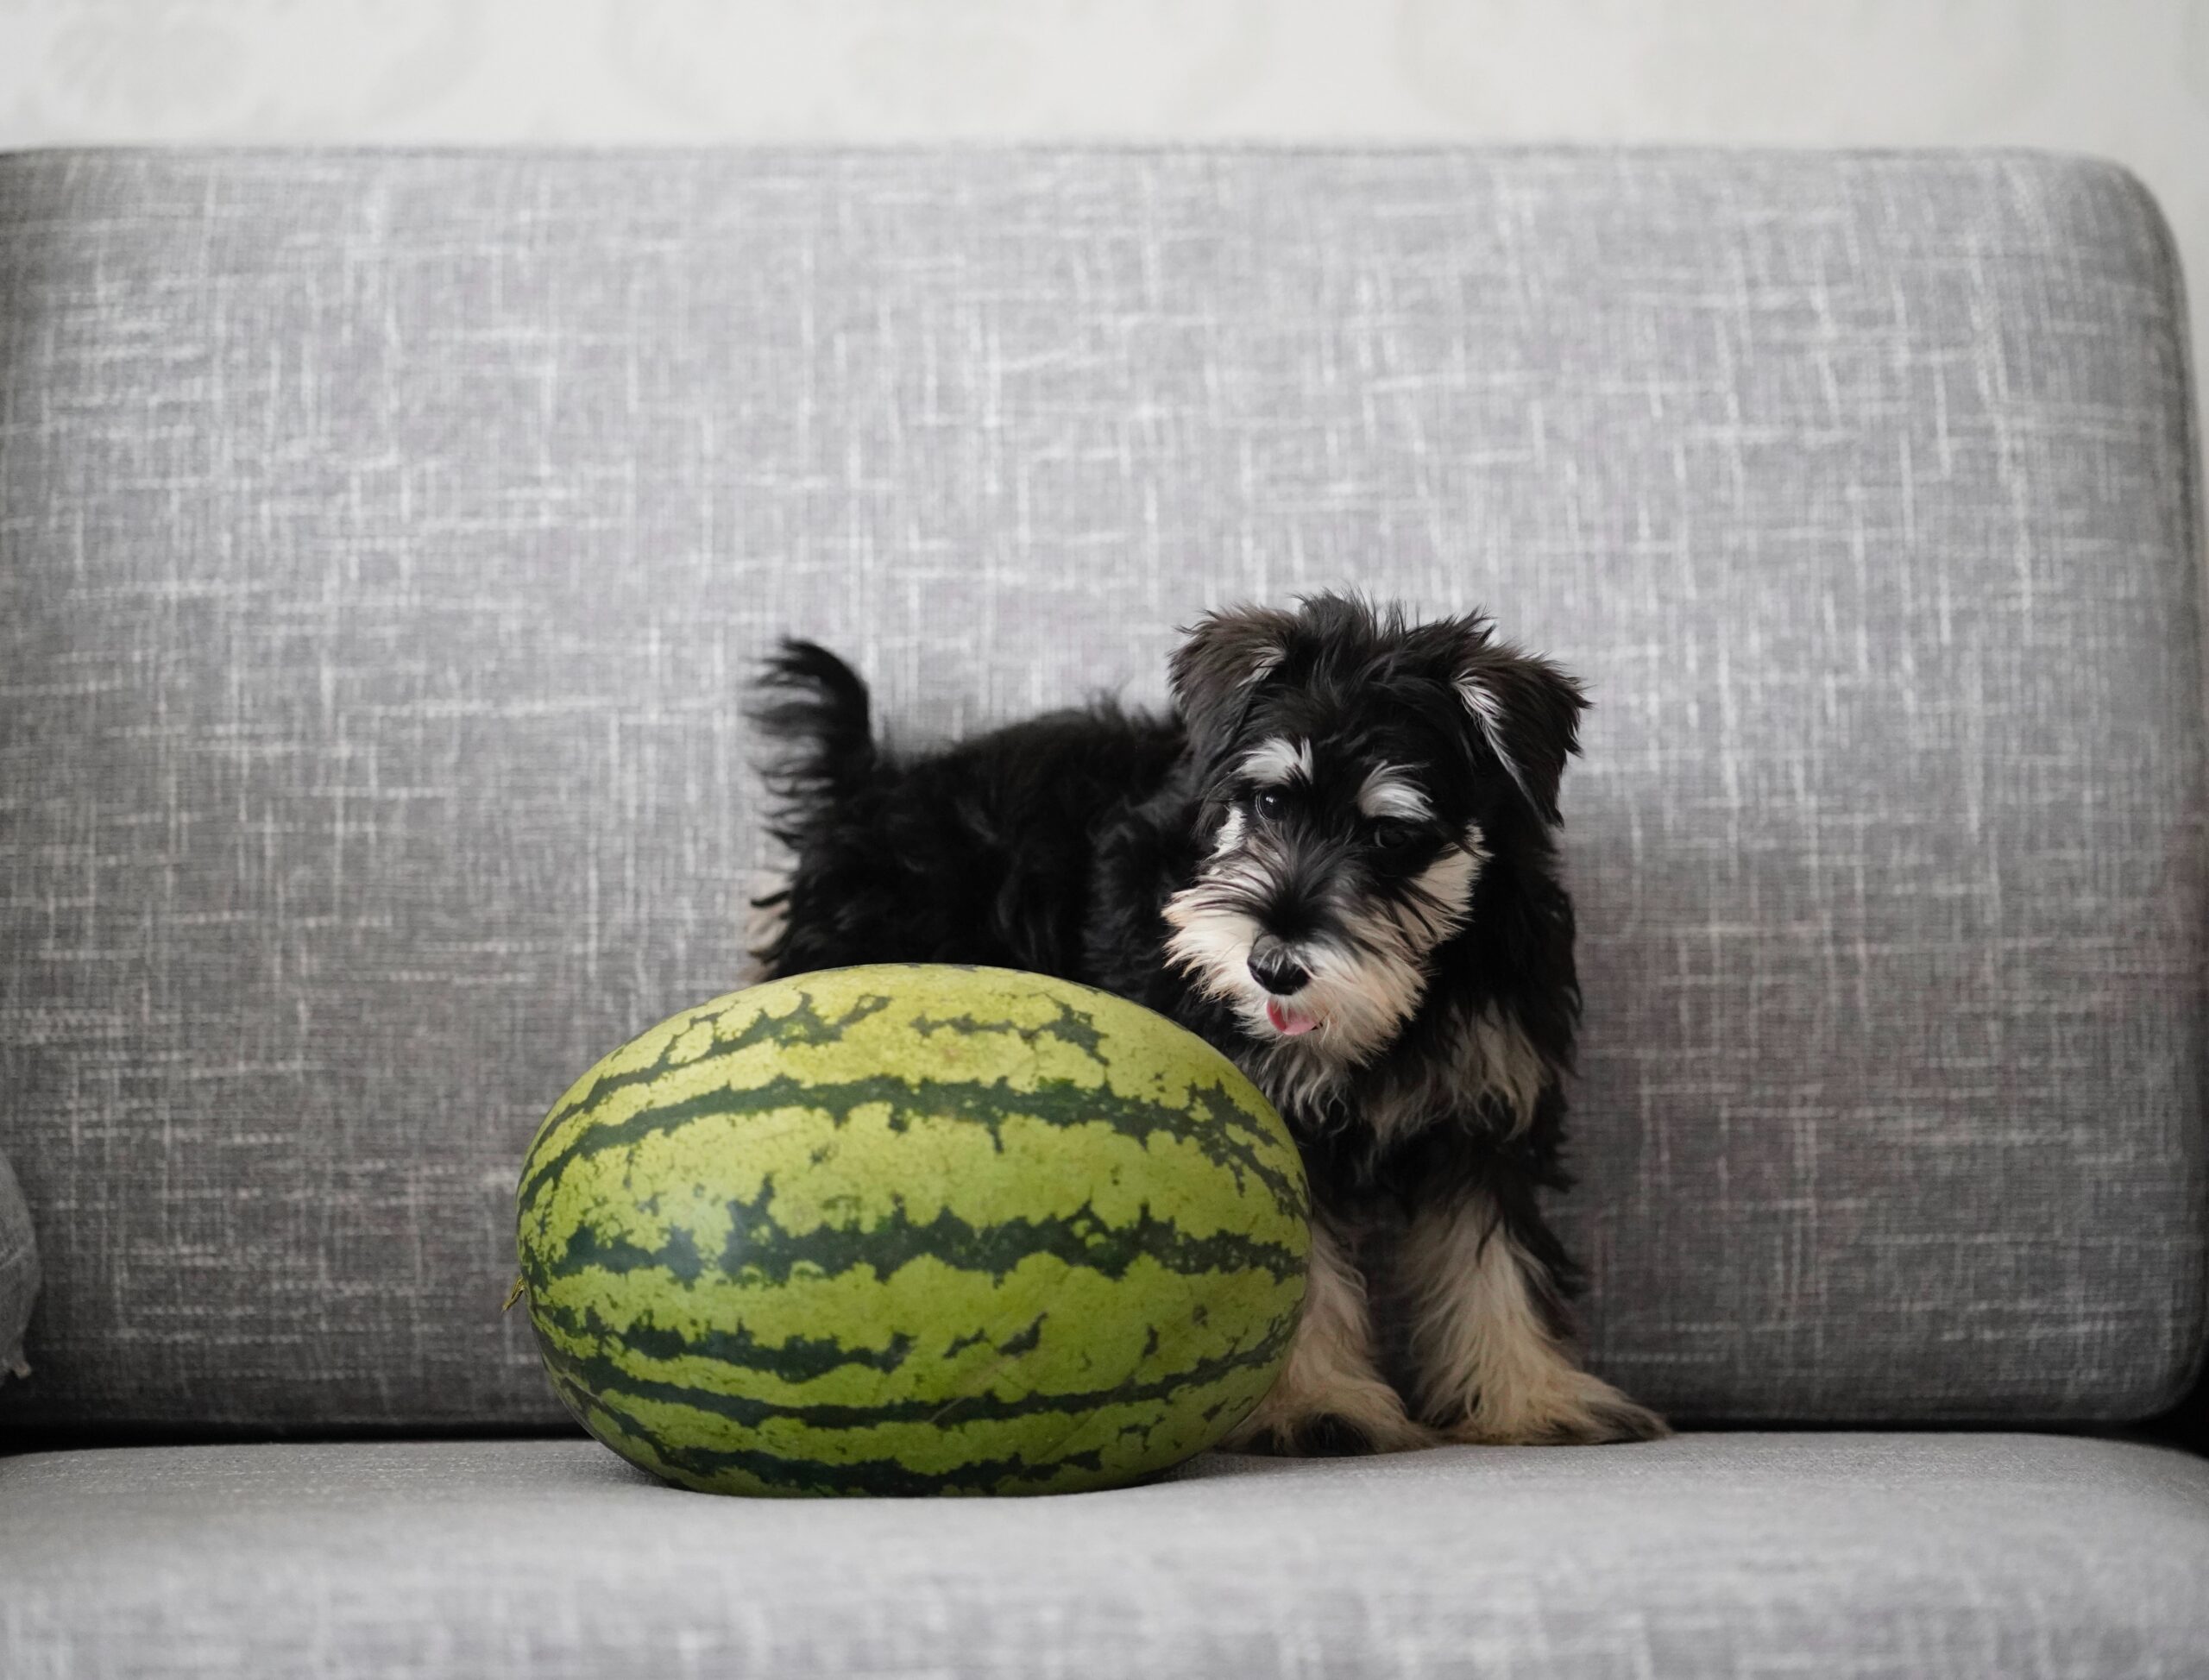 Juicy and Nutritious: Why Watermelon is a Great Addition to Your Dog’s Diet